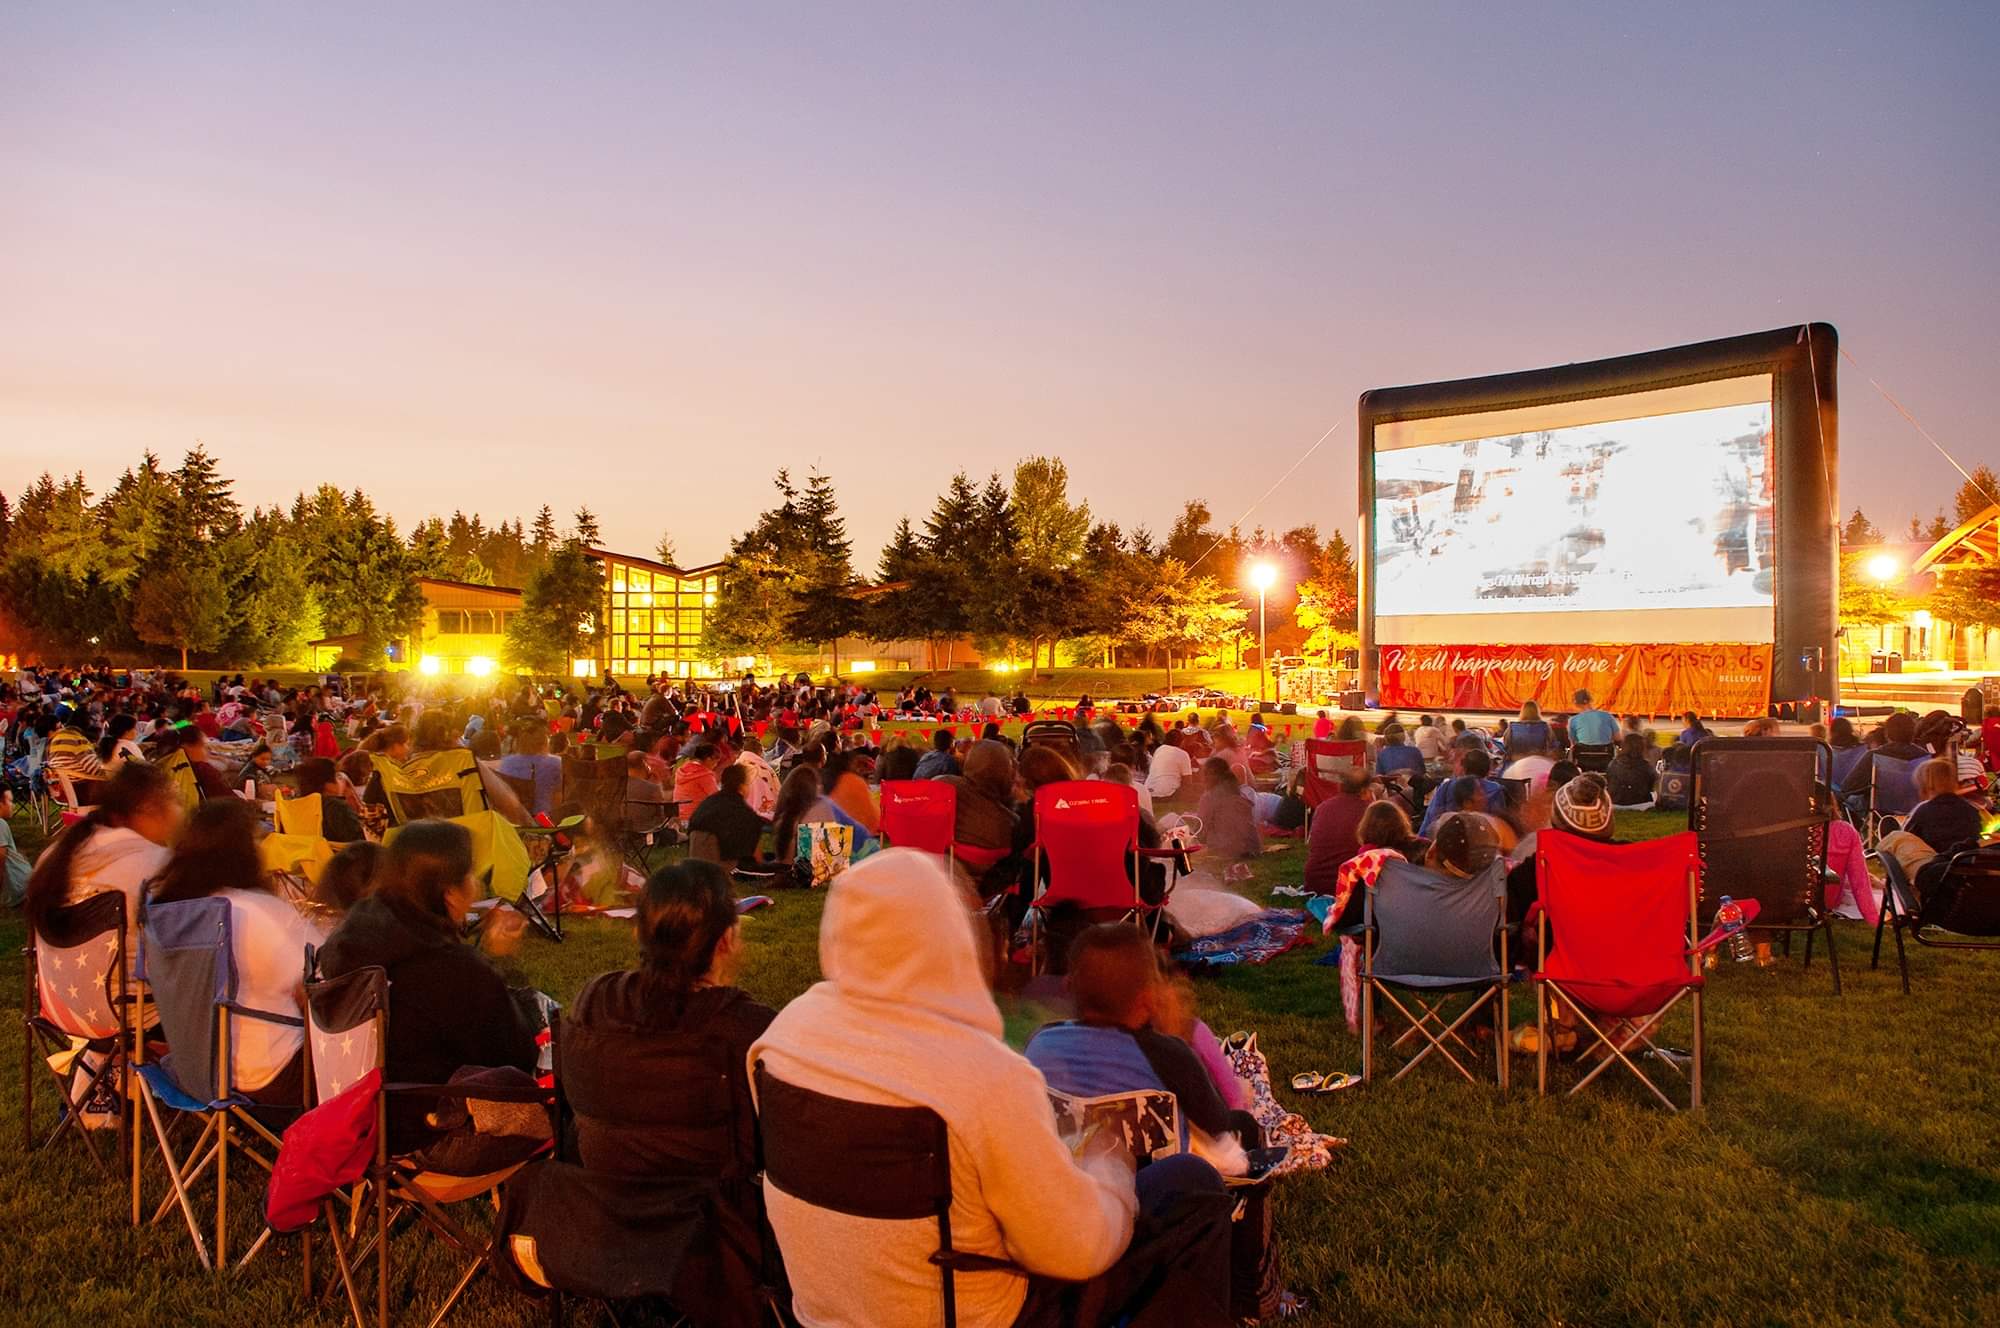 People sitting on the lawn at Crossroads Park in Bellevue watching an outdoor movie on a big screen on a summer evening